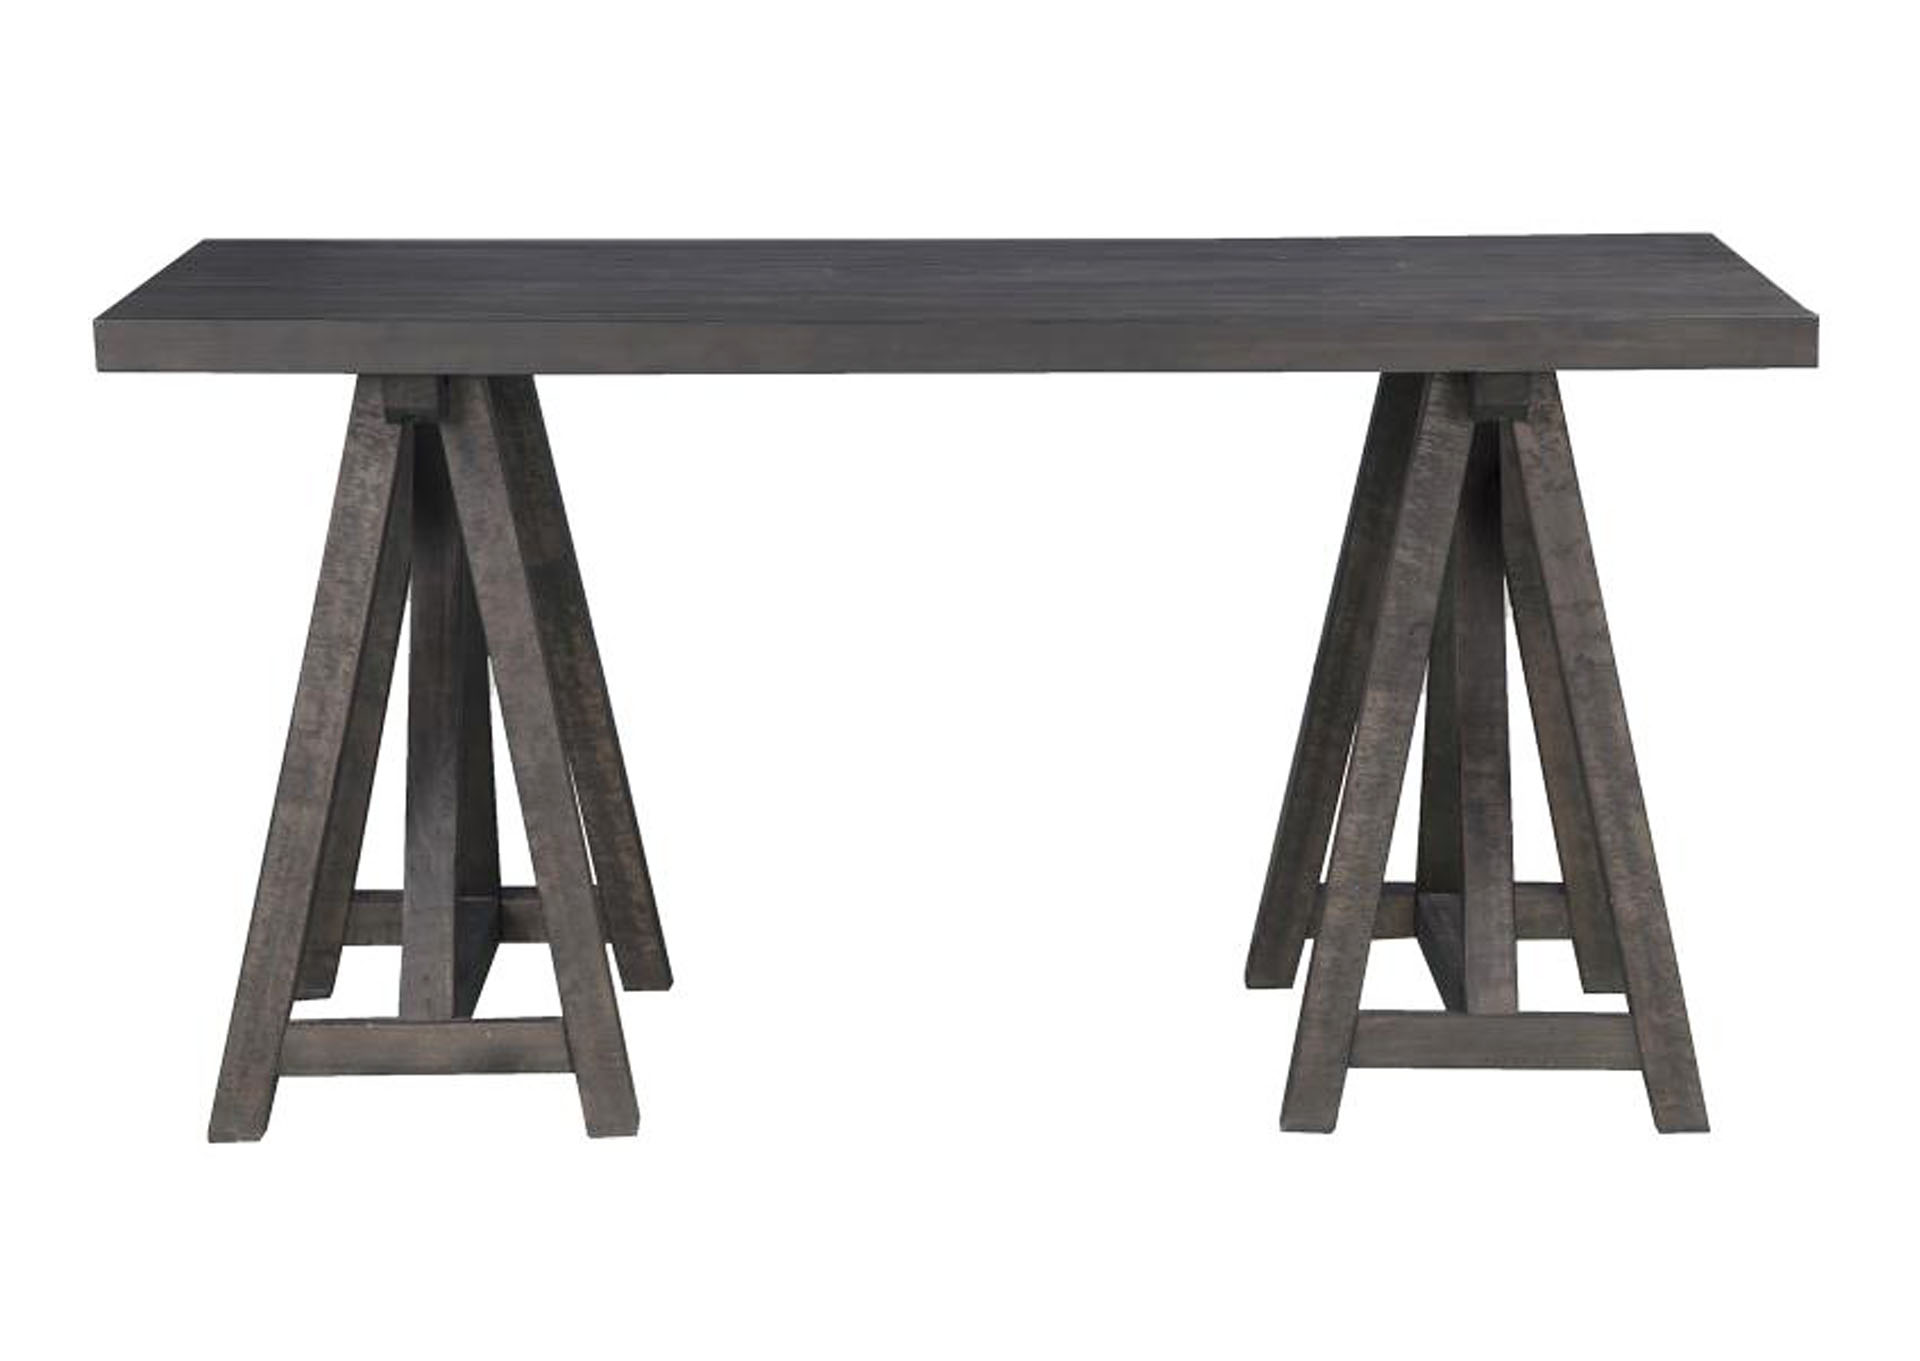 Sutton Place Weathered Charcoal Desk,Magnussen